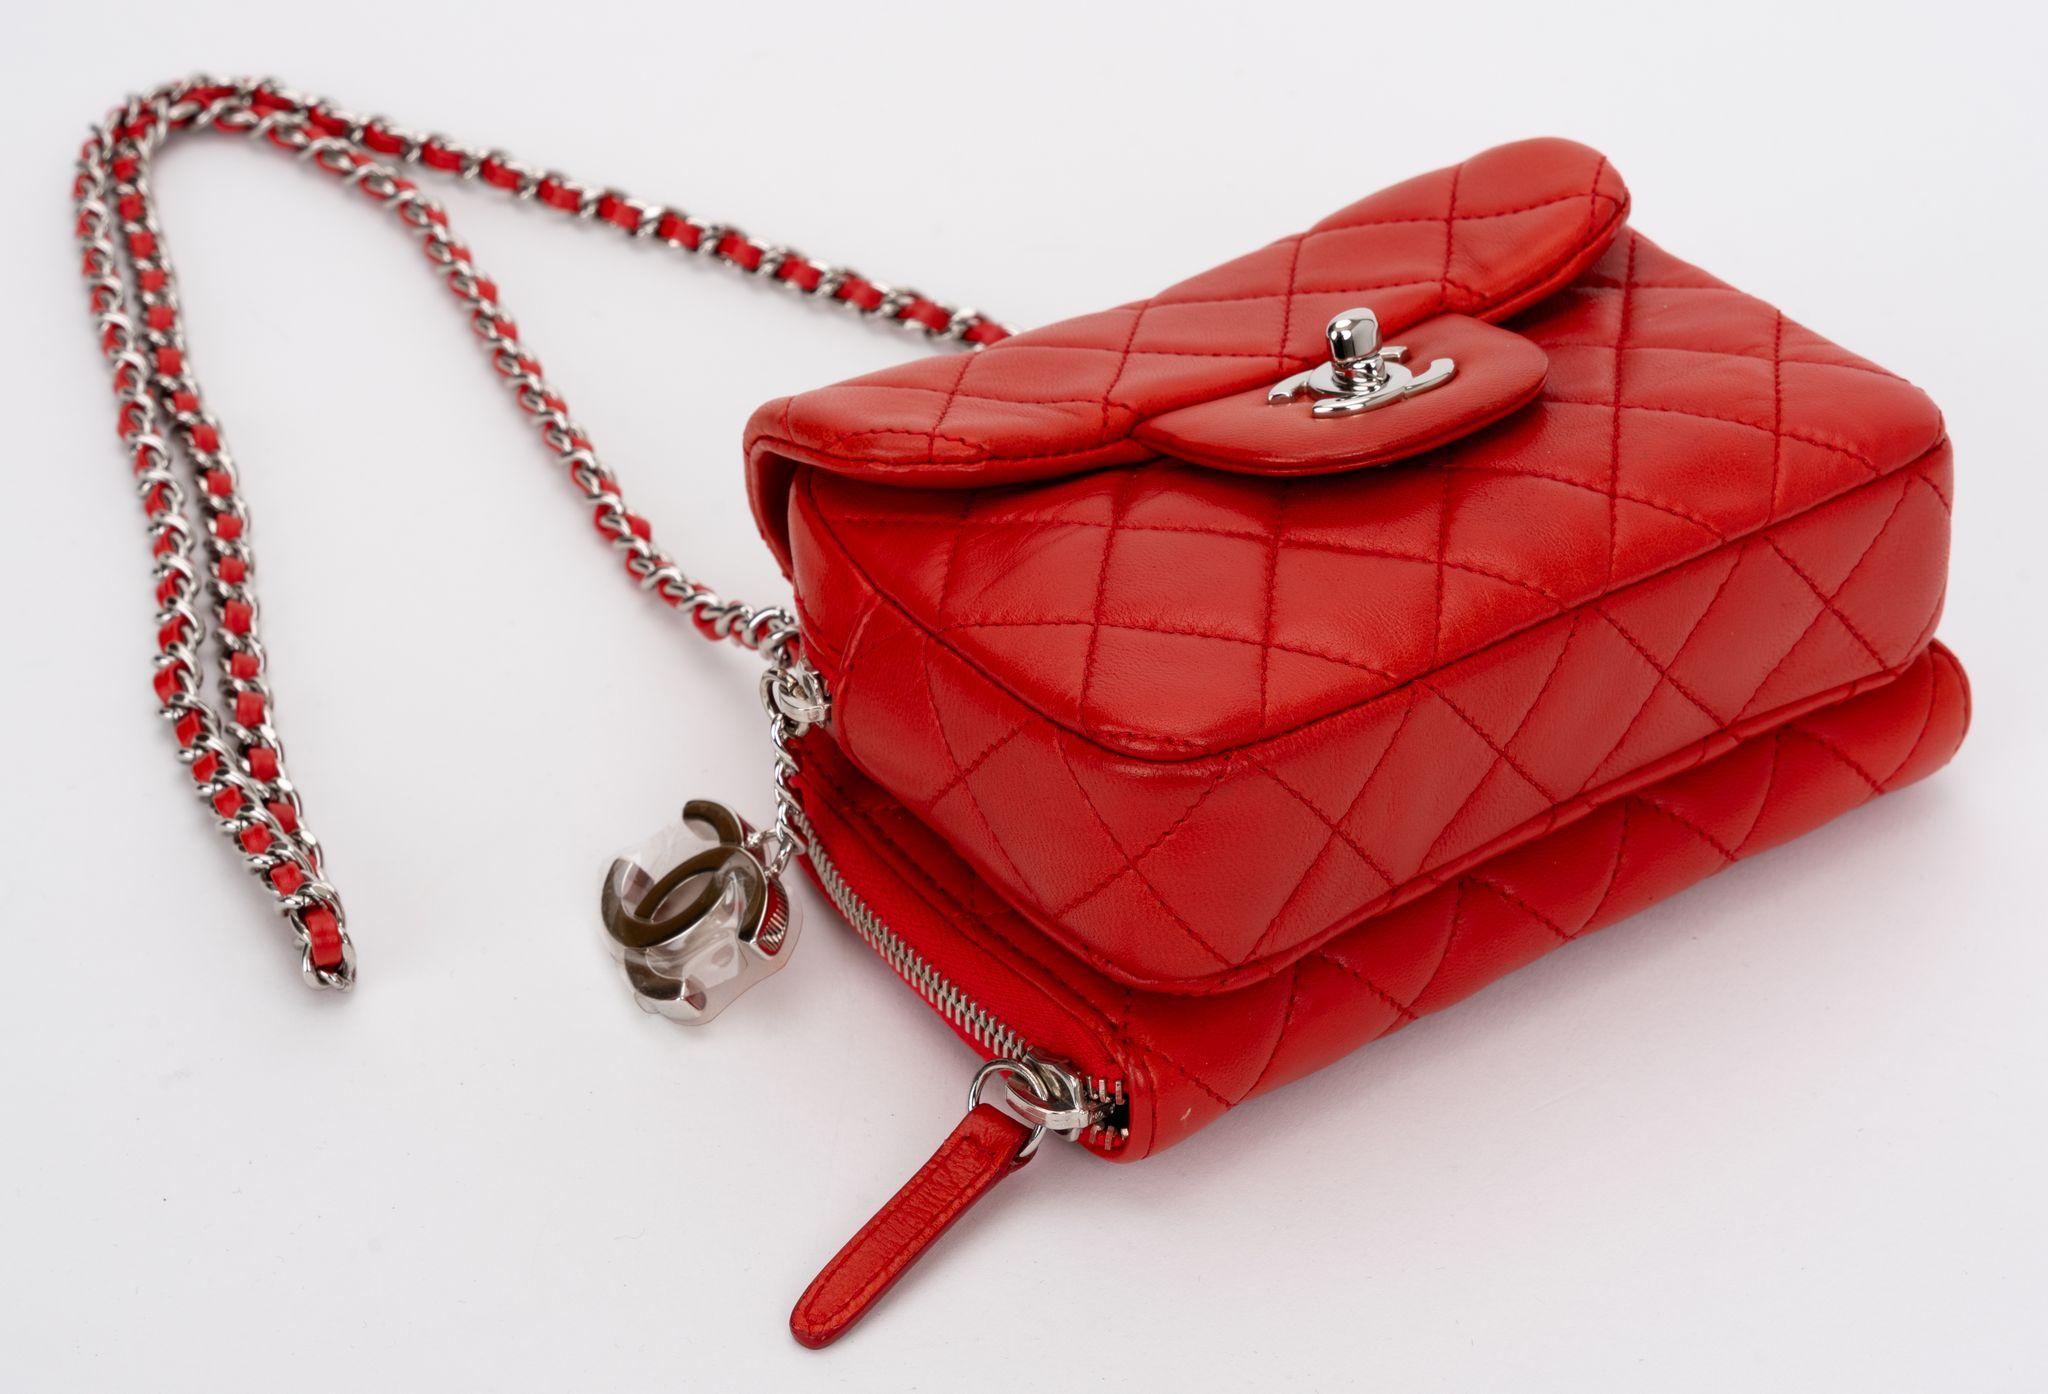 Chanel Red Leather Crossbody Flap Bag For Sale 1